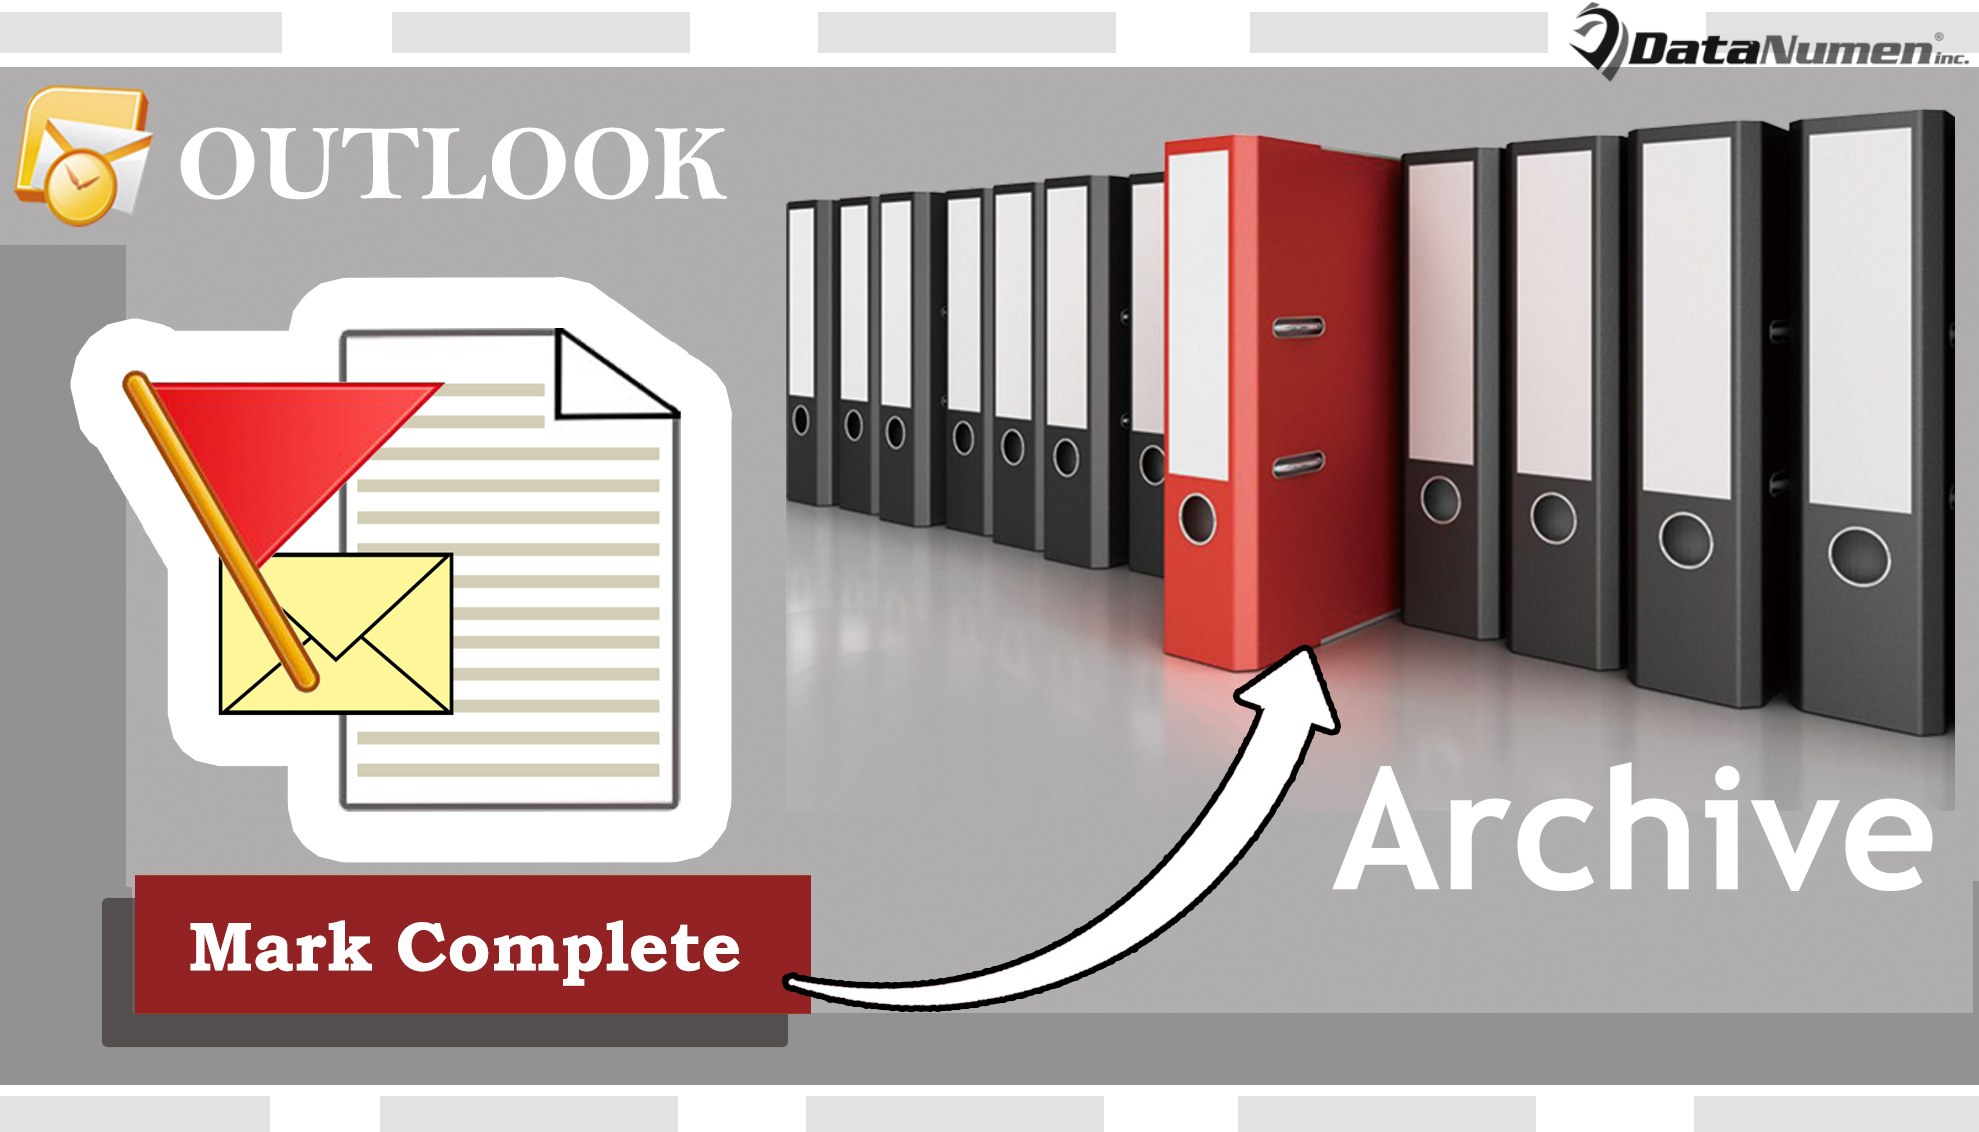 Auto Archive a Flagged Email after Marking It Complete in Your Outlook